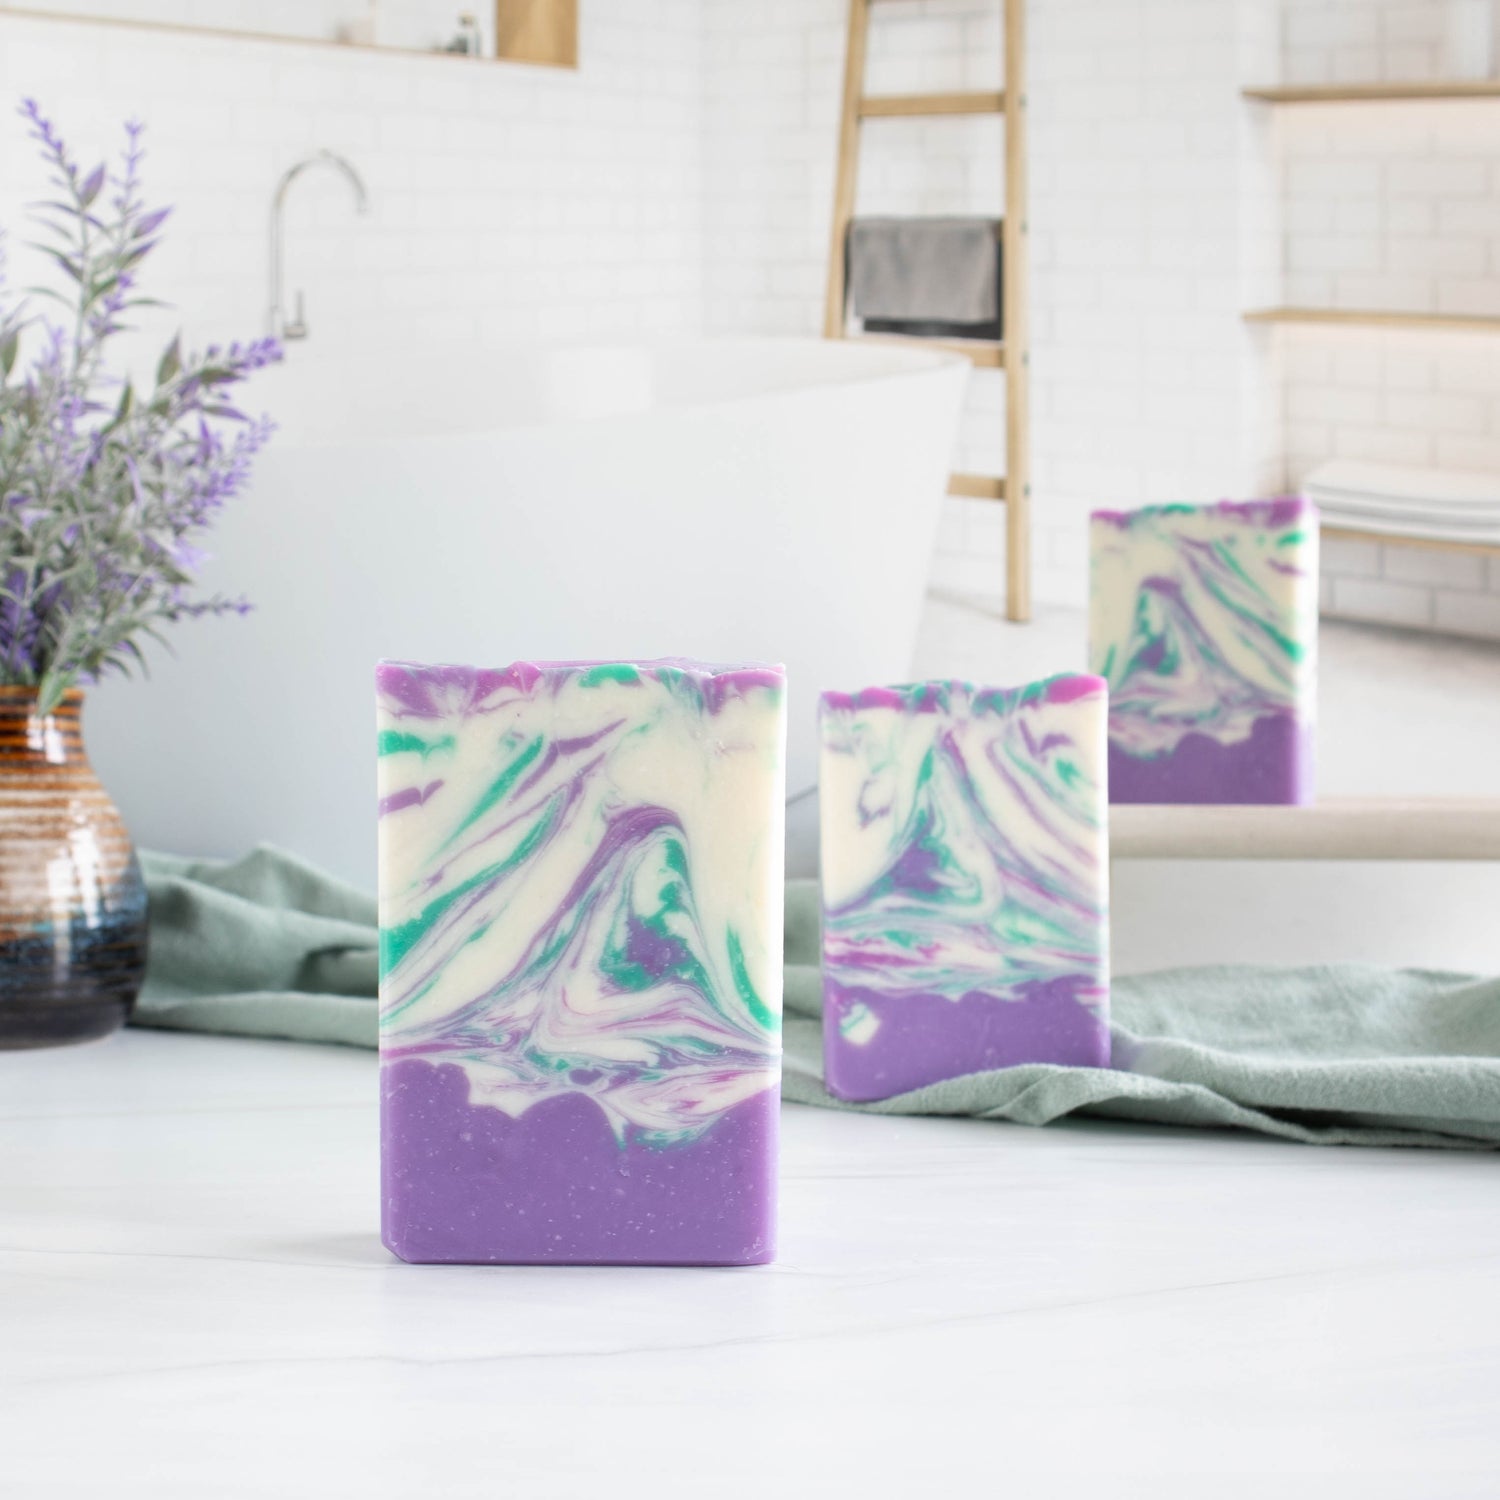 three lavender soaps in a diagonal. They have a purple bottom with a swirled top. The swirls have a white base with 2 purples and a green swirls. They are sitting on a white board with a sage green towel running between them. There is an image of a spa type bathroom in the background